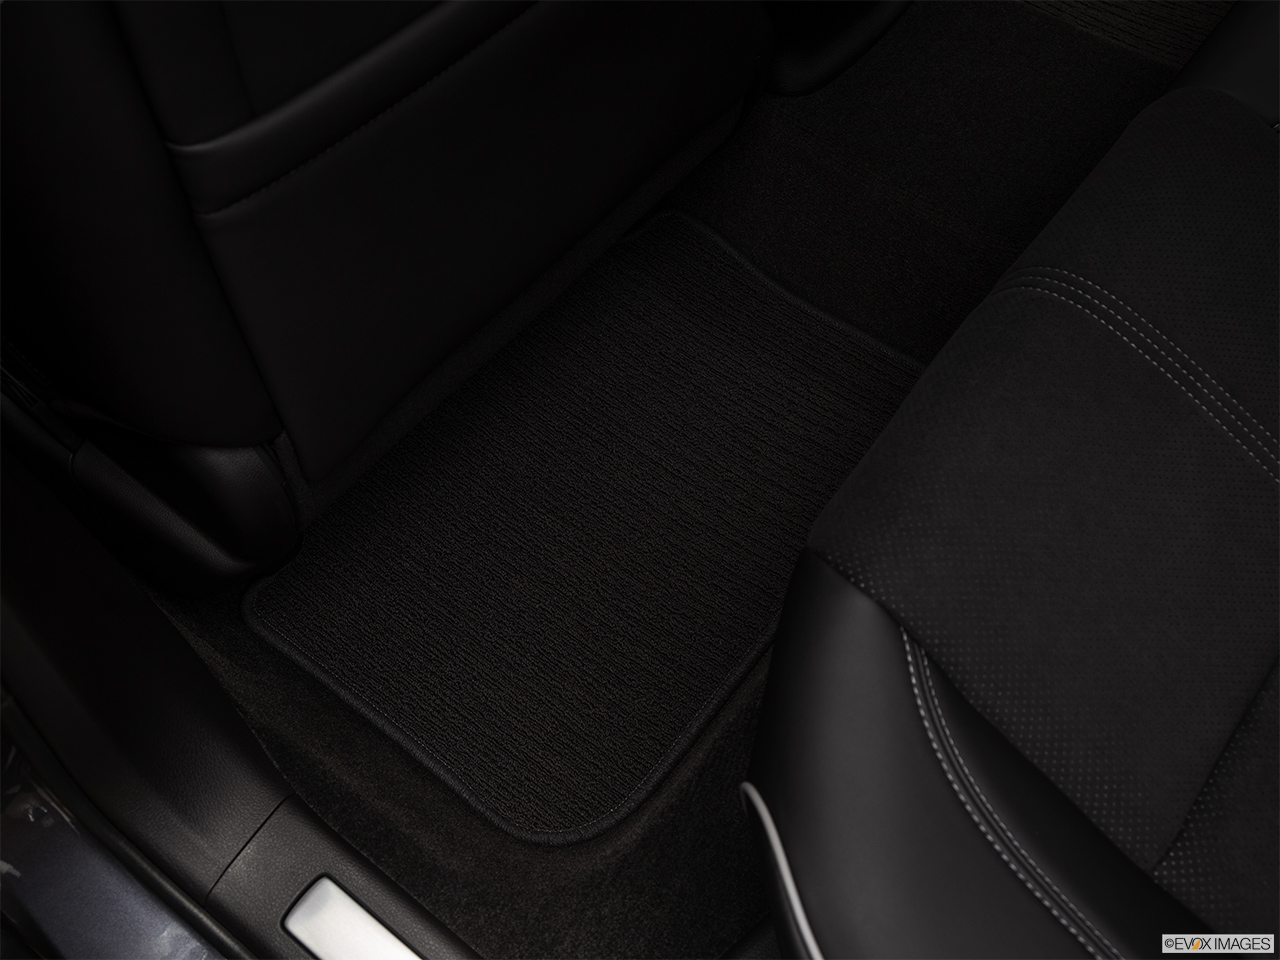 2019 Acura TLX 3.5L Rear driver's side floor mat. Mid-seat level from outside looking in. 